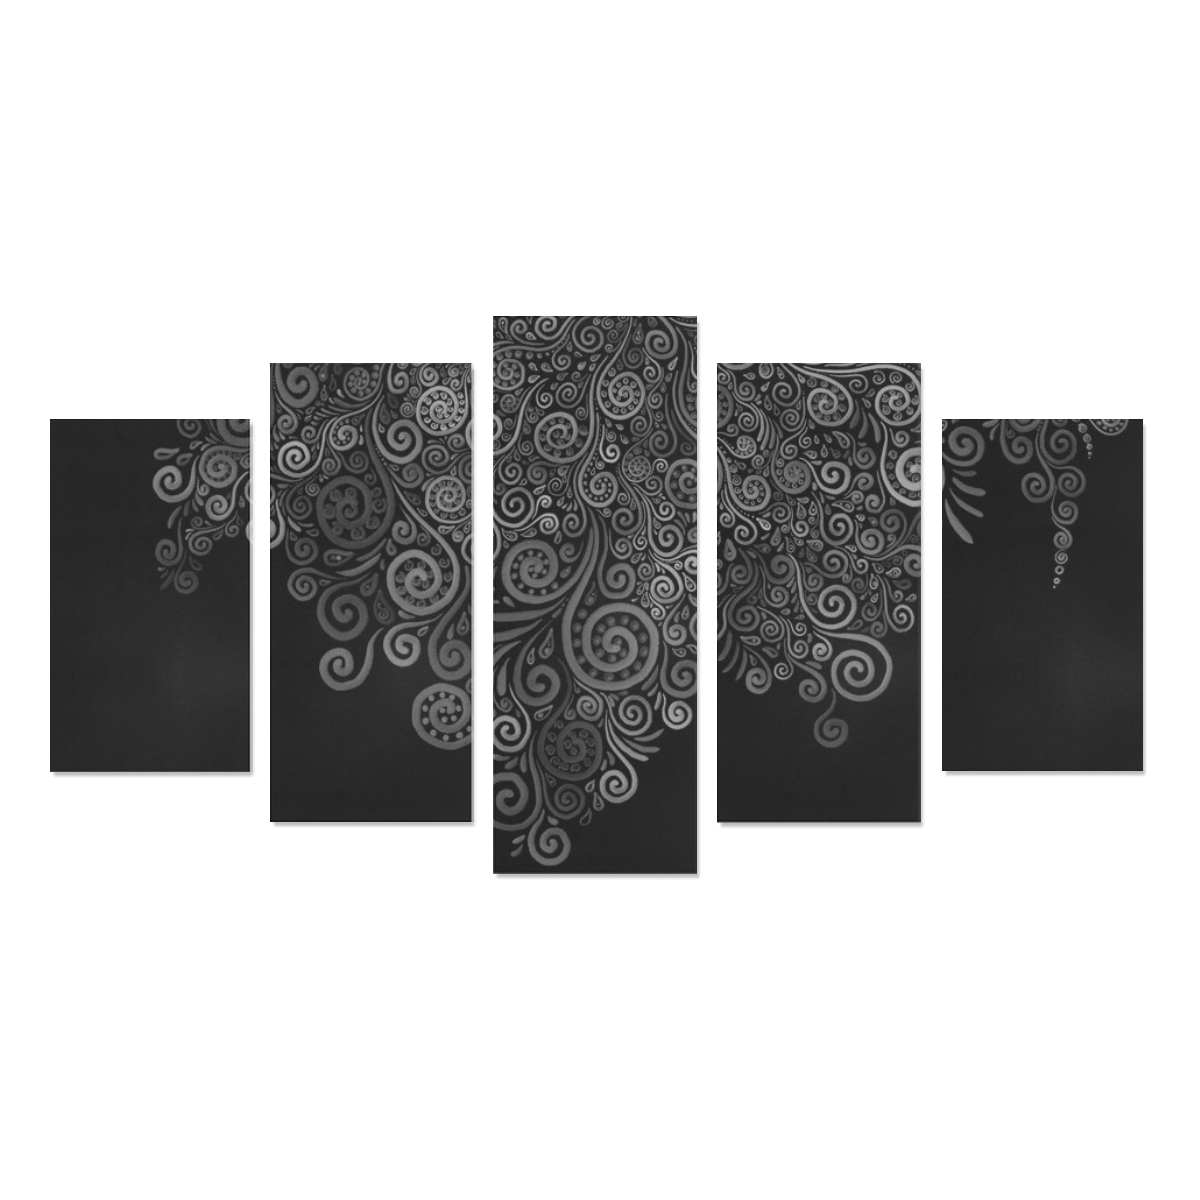 3D Psychedelic Black and White Rose Canvas Print Sets A (No Frame)